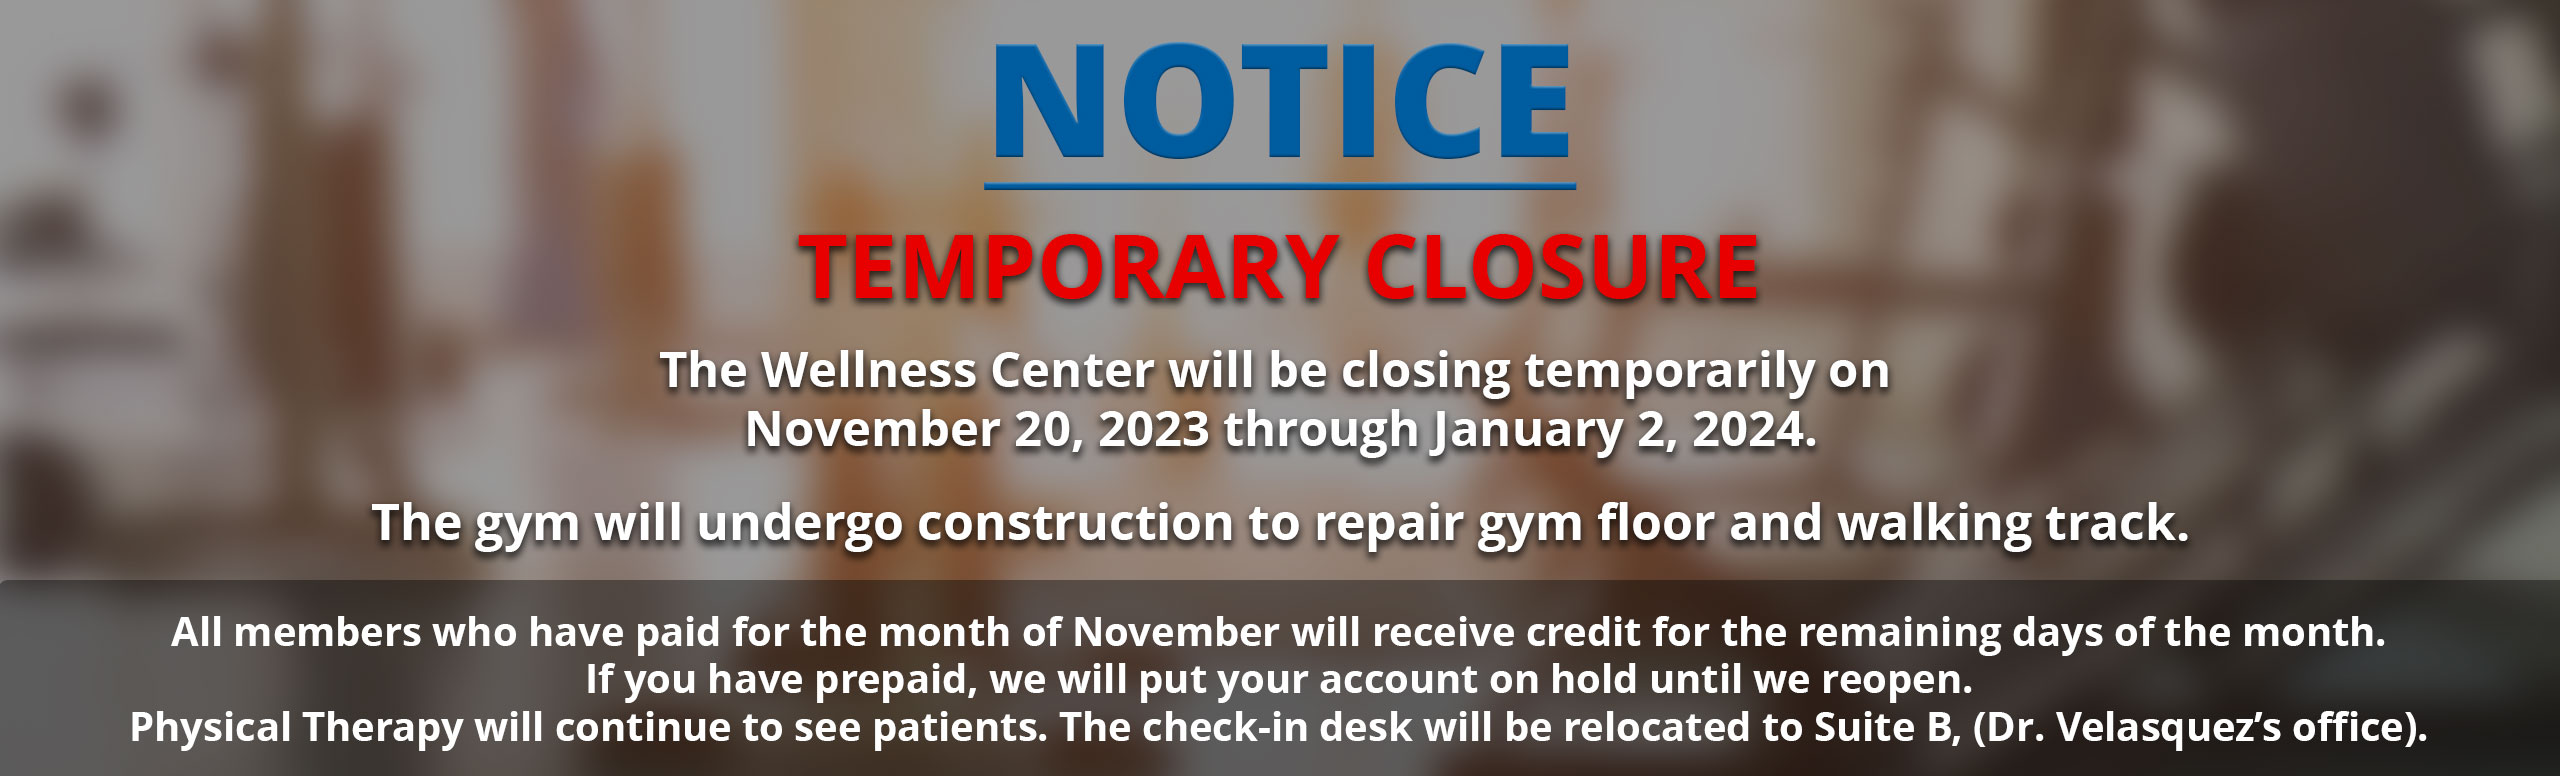 NOTICE OF TEMPORARY CLOSURE
 
The Wellness Center will be closing temporarily on November 20, 2023 through January 2, 2024.
 
The gym will undergo construction to repair gym floor and walking track.
 
All members who have paid for the month of November will receive credit for the remaining days of the month.
If you have prepaid, we will put your account on hold until we reopen.
Physical Therapy will continue to see patients. The check-in desk will be relocated to Suite B, (Dr. Velasquez’s office).